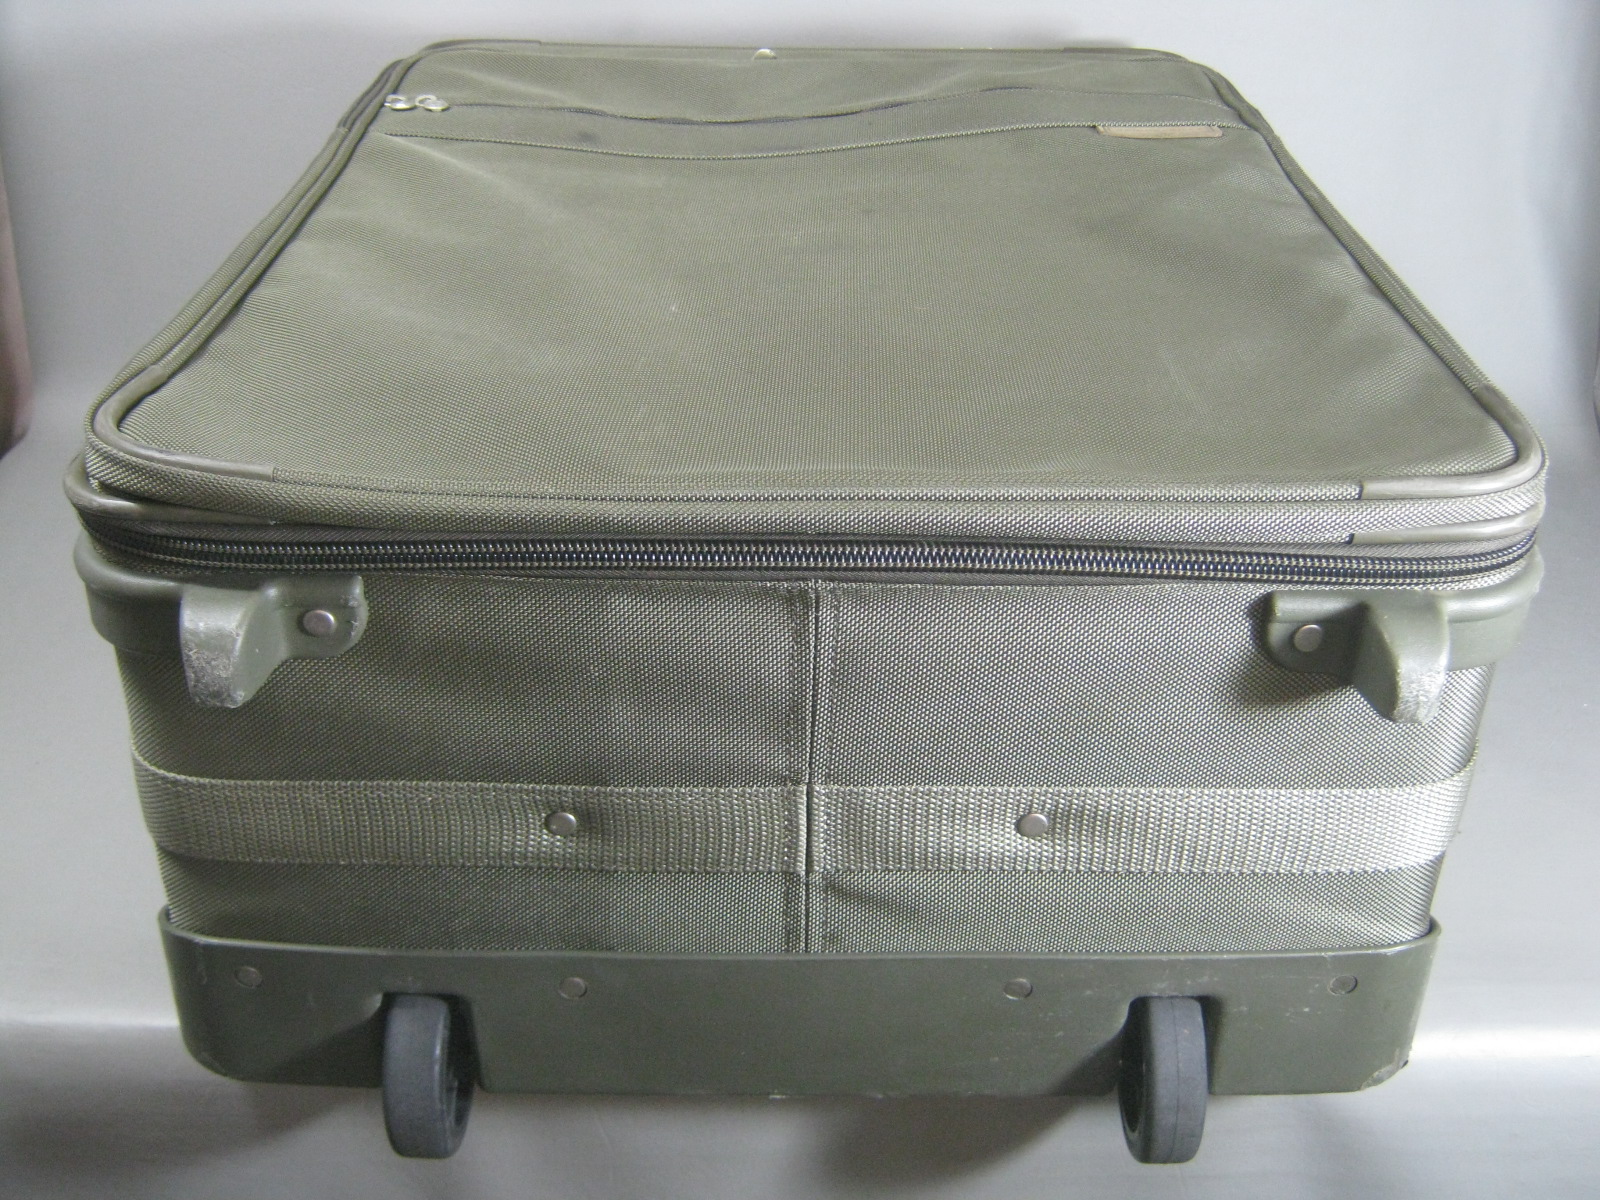 Briggs & Riley Suitcase 28" Baseline Luggage Olive Green Wheeled Upright No Res 8